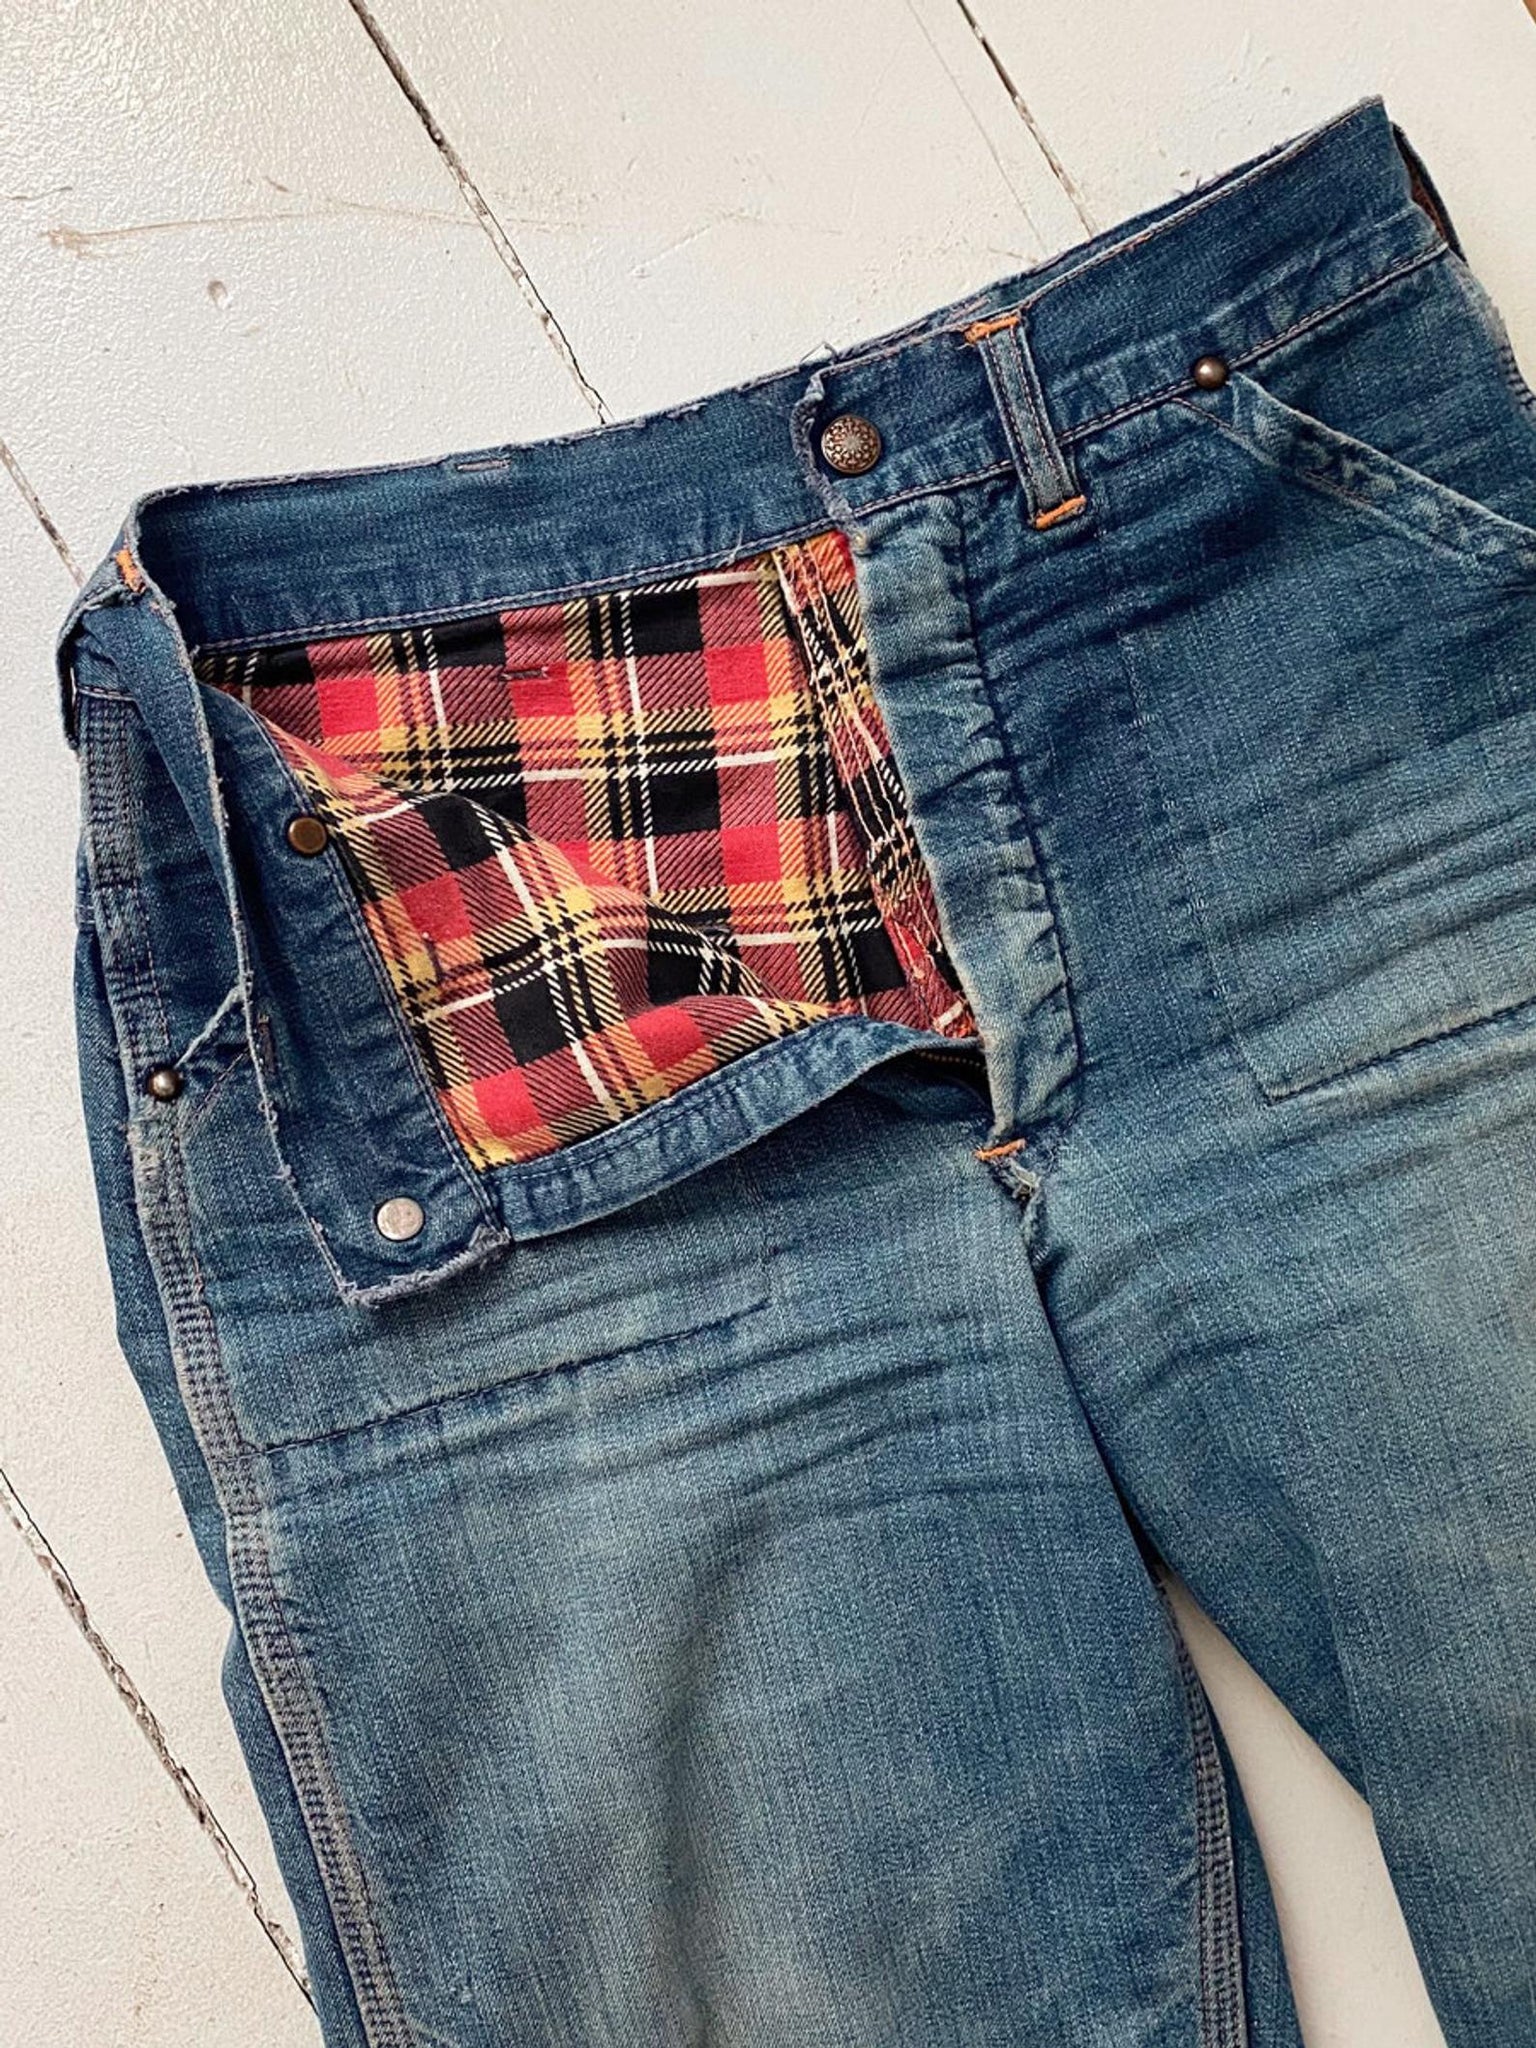 50's Flannel Lined Jeans 27x29